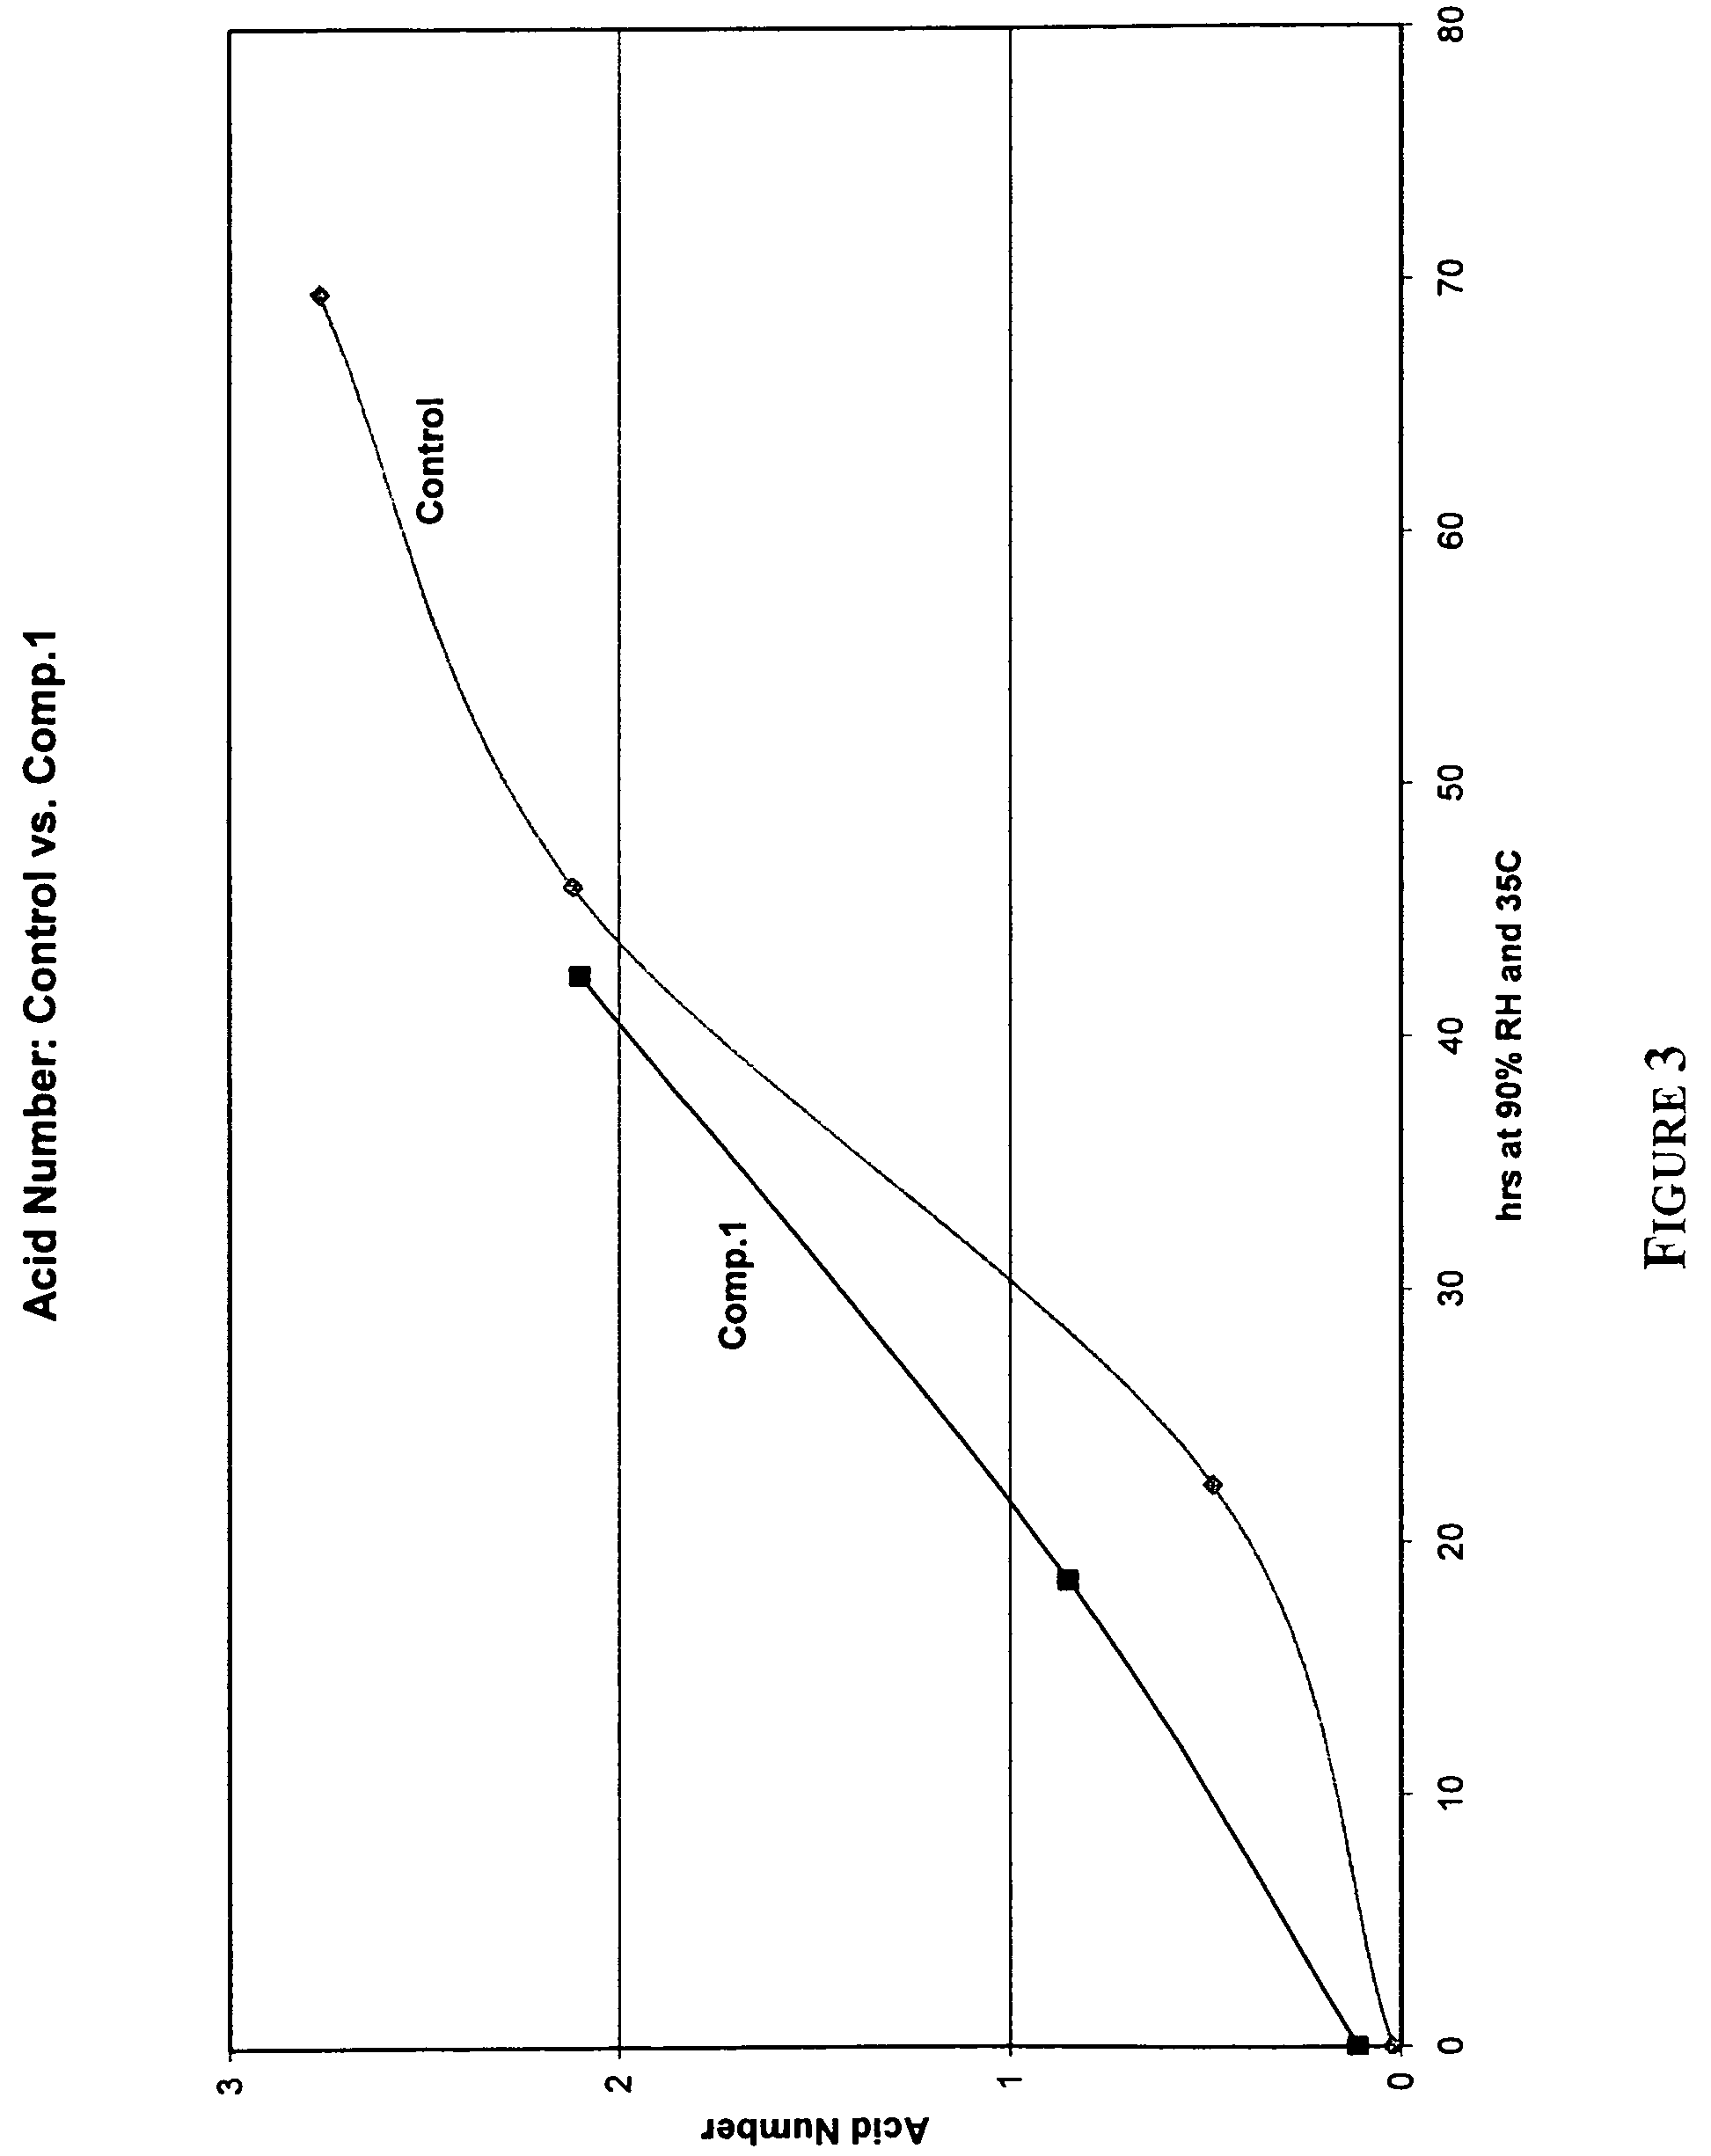 Blended phosphite or phosphonite compositions having improved hydrolytic stability